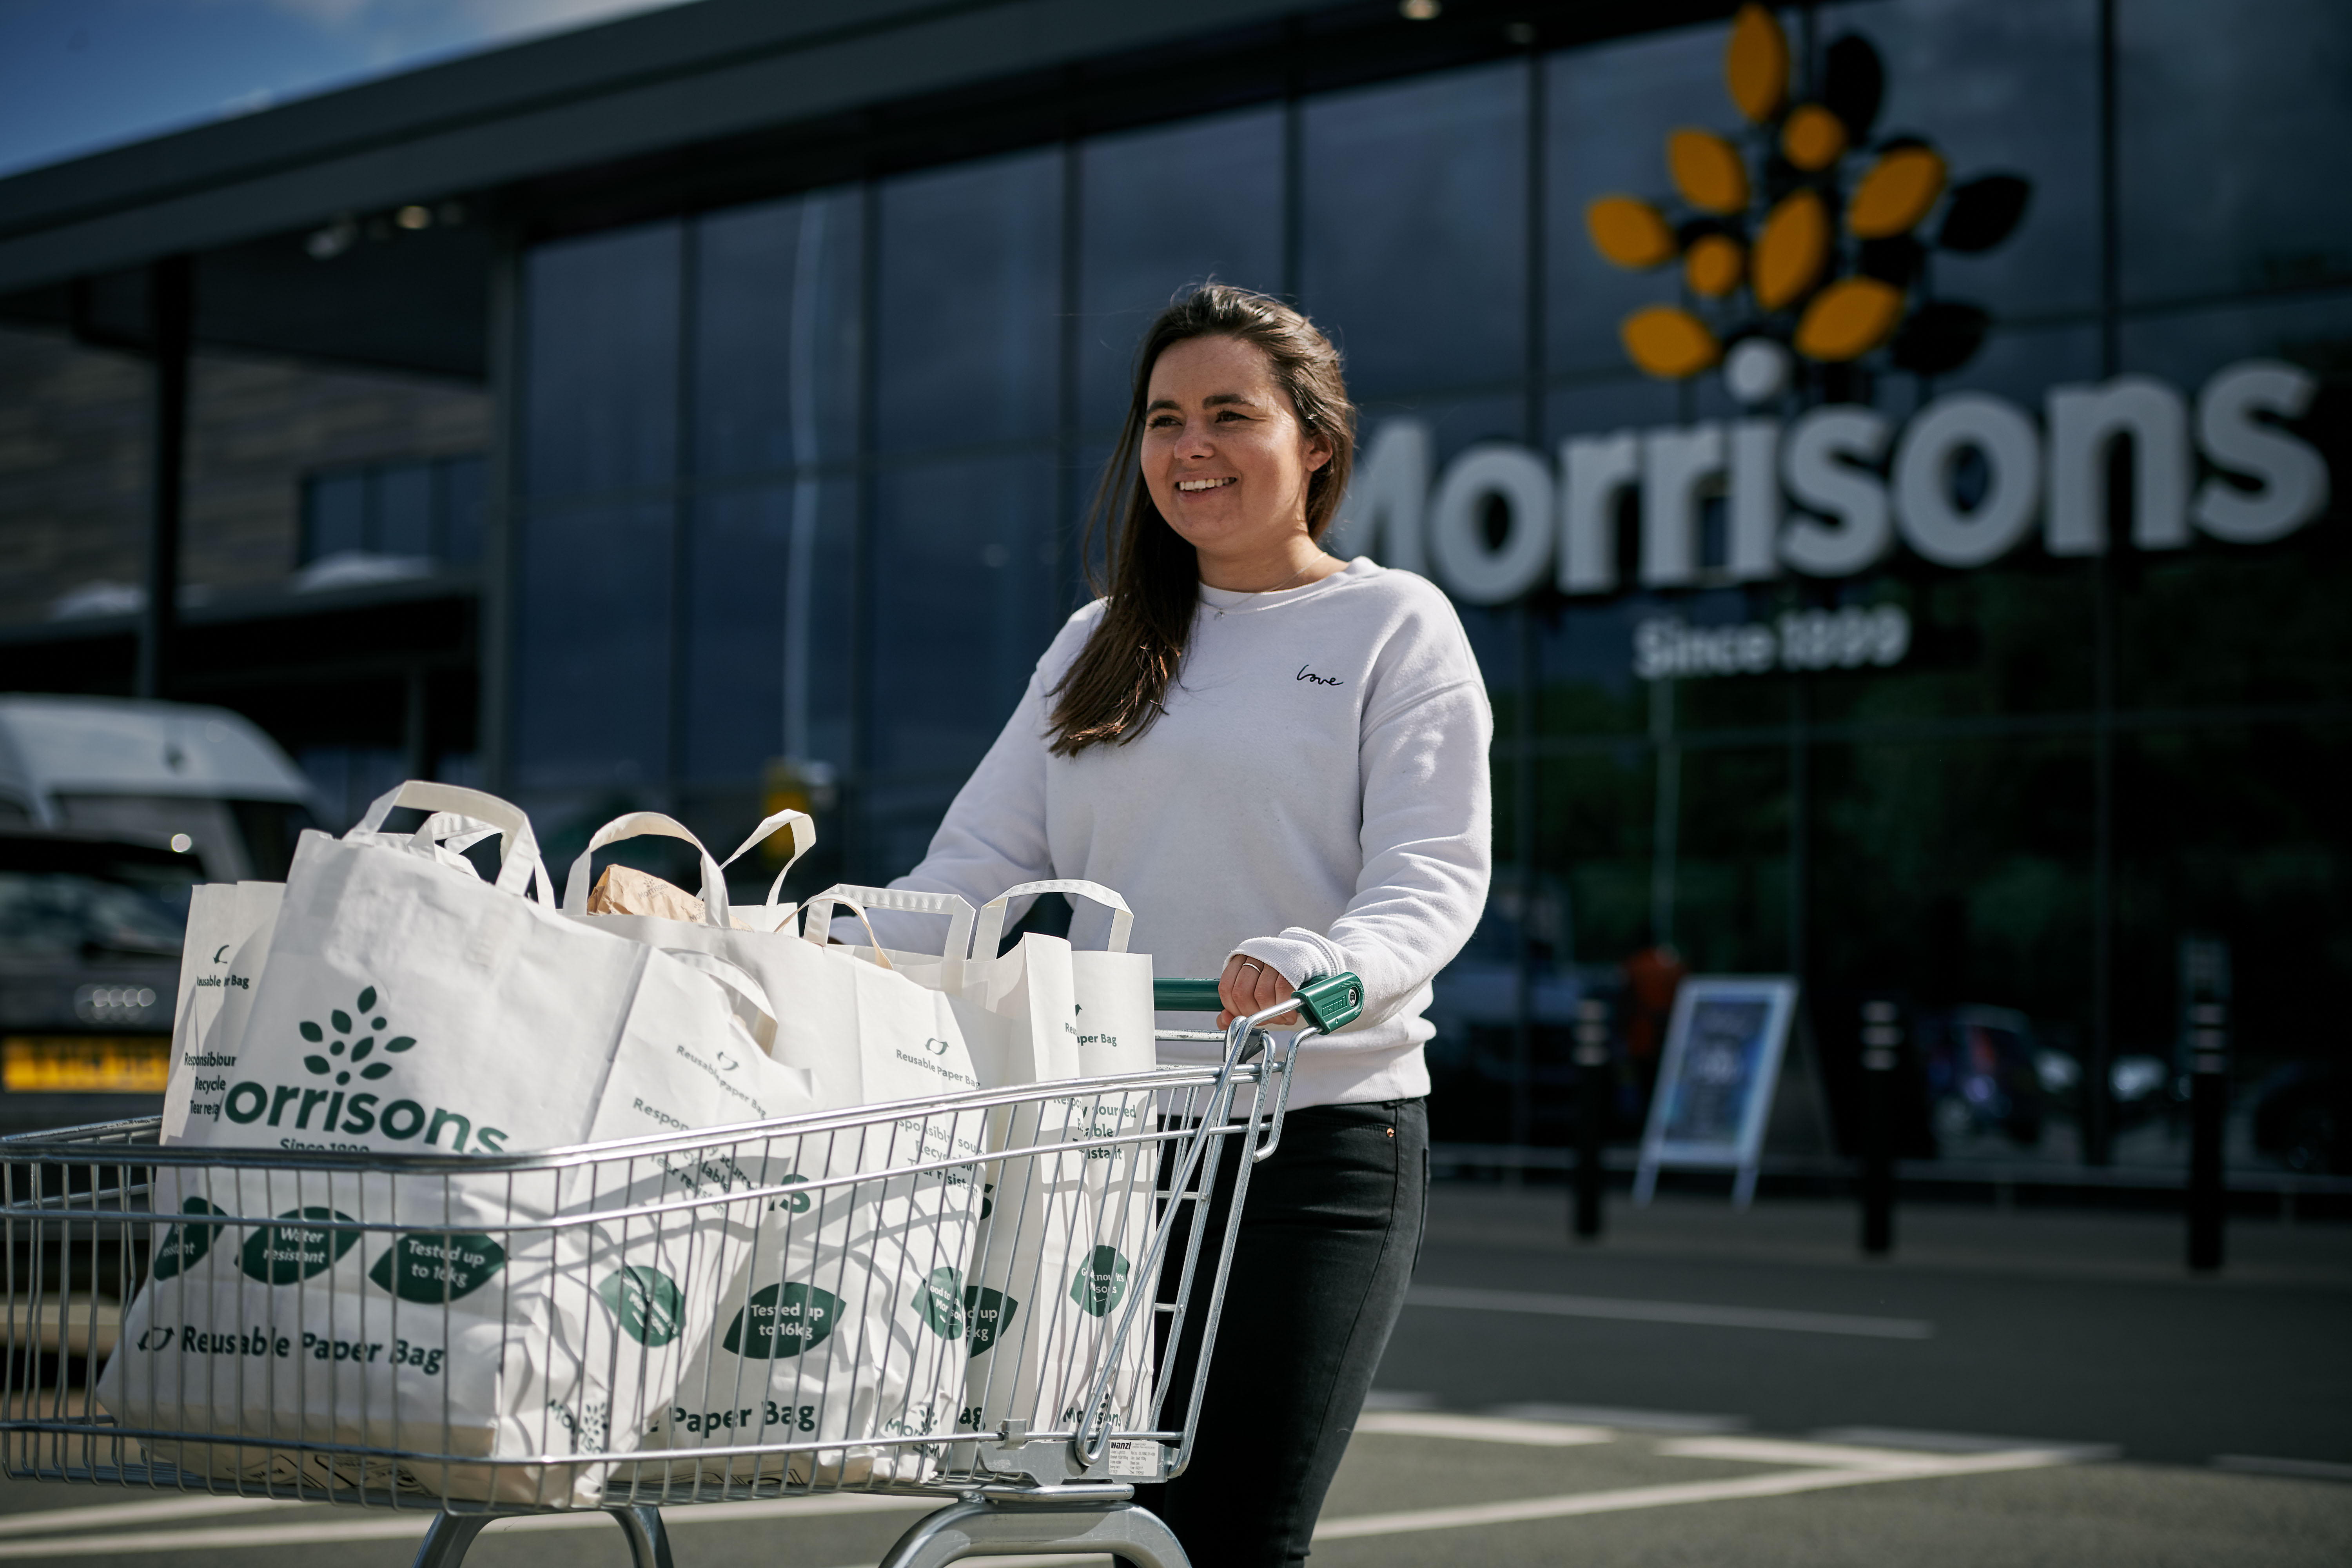 Morrisons to introduce paper bags, The Independent